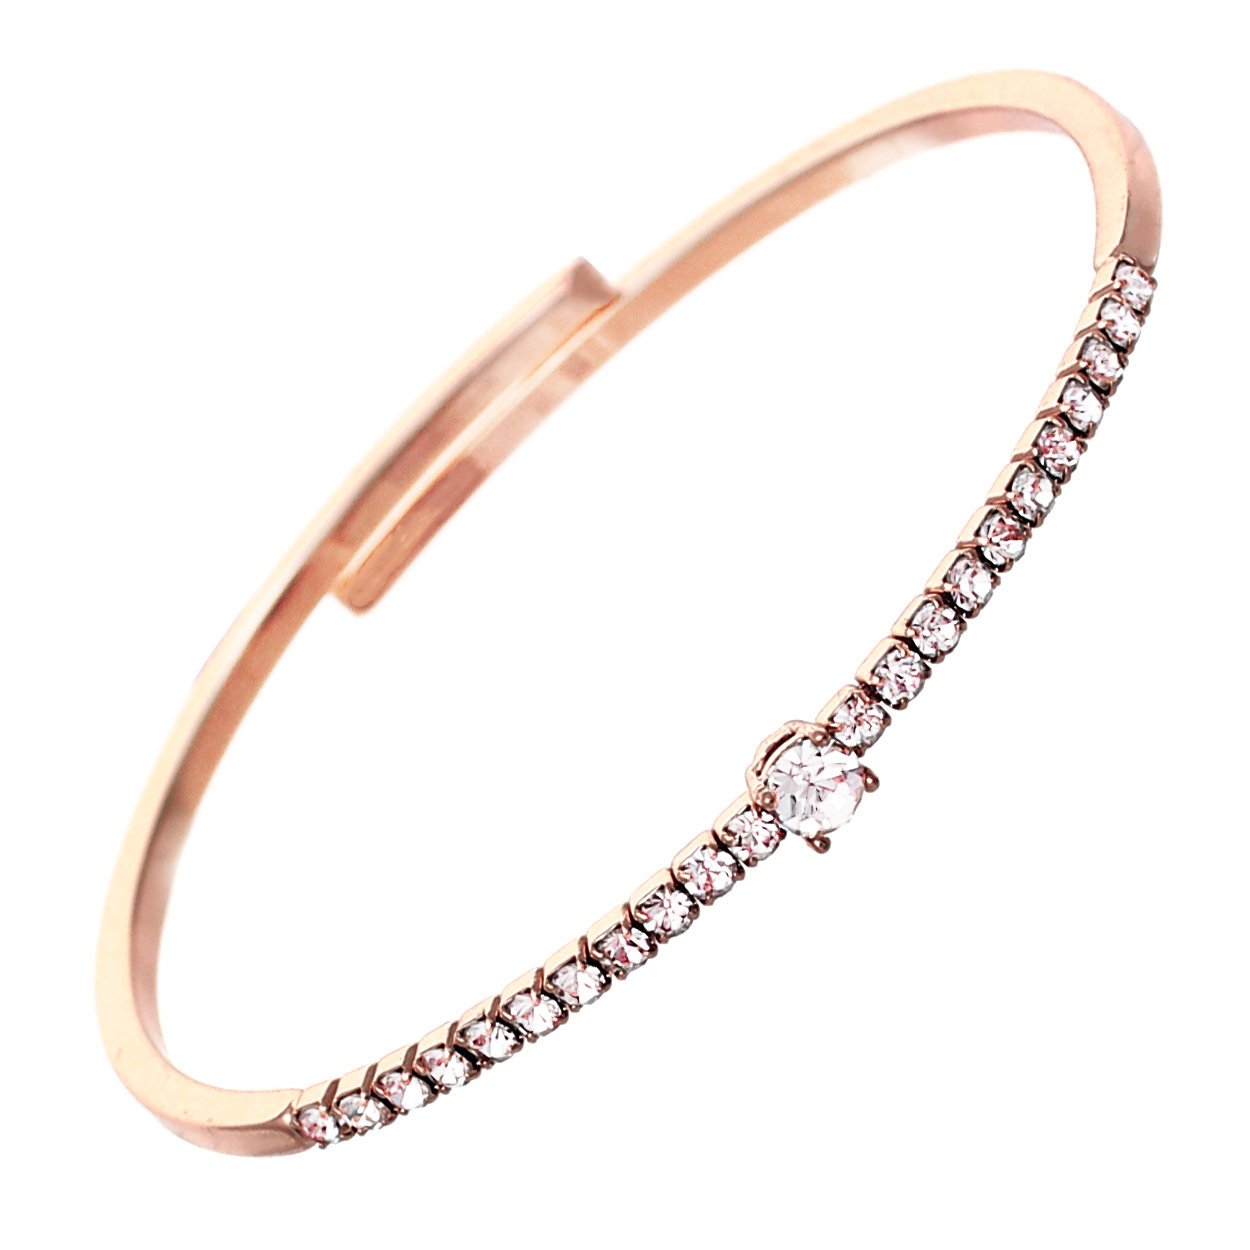 Priyaasi Rose Gold-Plated AD-Studded Handcrafted Floral Shaped Bangle Style  Bracelet Price in India, Full Specifications & Offers | DTashion.com